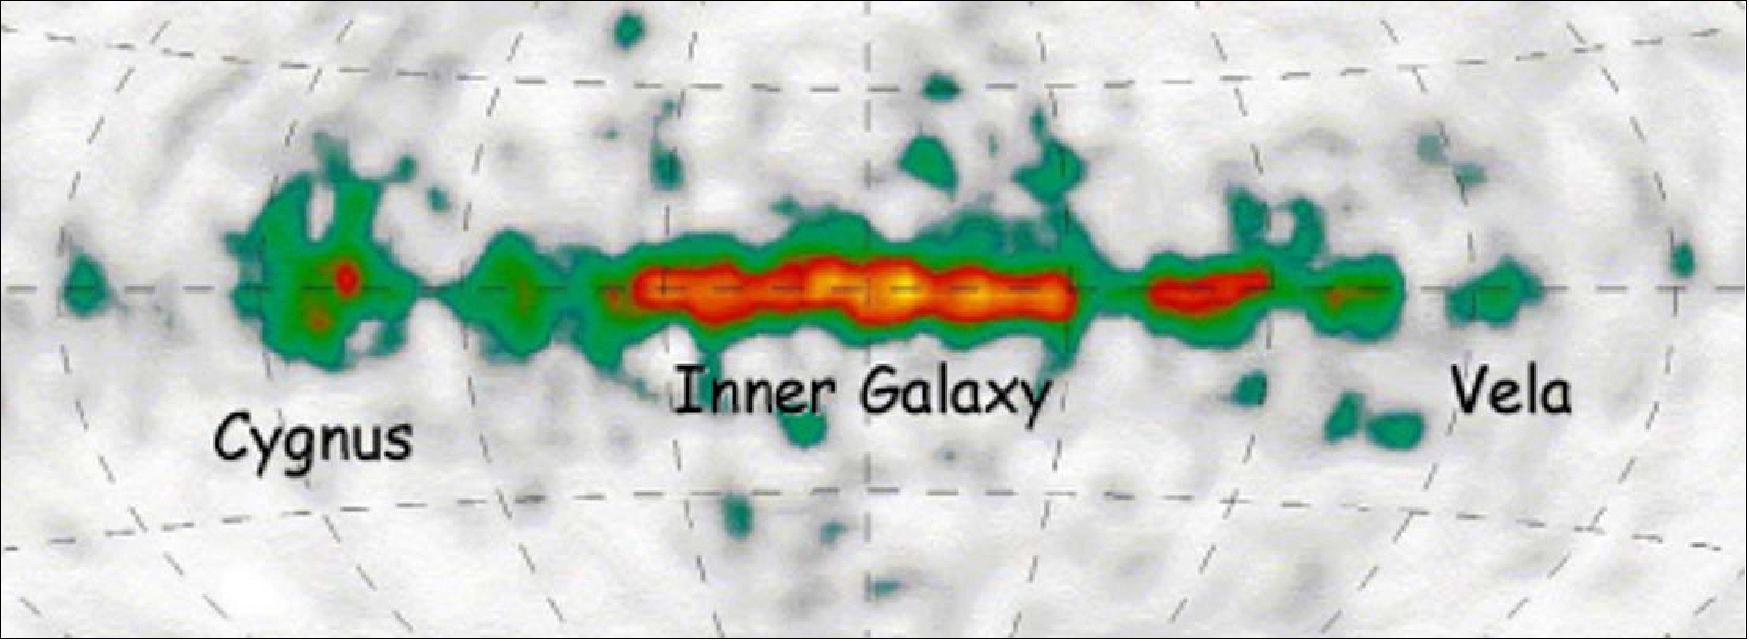 Figure 44: The distribution of massive stars in our Galaxy, which are the likely sources of the observed gamma-rays from the isotope iron-60, is best traced by the radioactivity of aluminum-26 shown in this image from NASA's COMPTON observatory. INTEGRAL has made detailed observations of aluminum-26's gamma-rays. The emission from iron-60 is too faint for making images with current gamma-ray telescopes (image credit: MPE 2001 (data: NASA COMPTON)